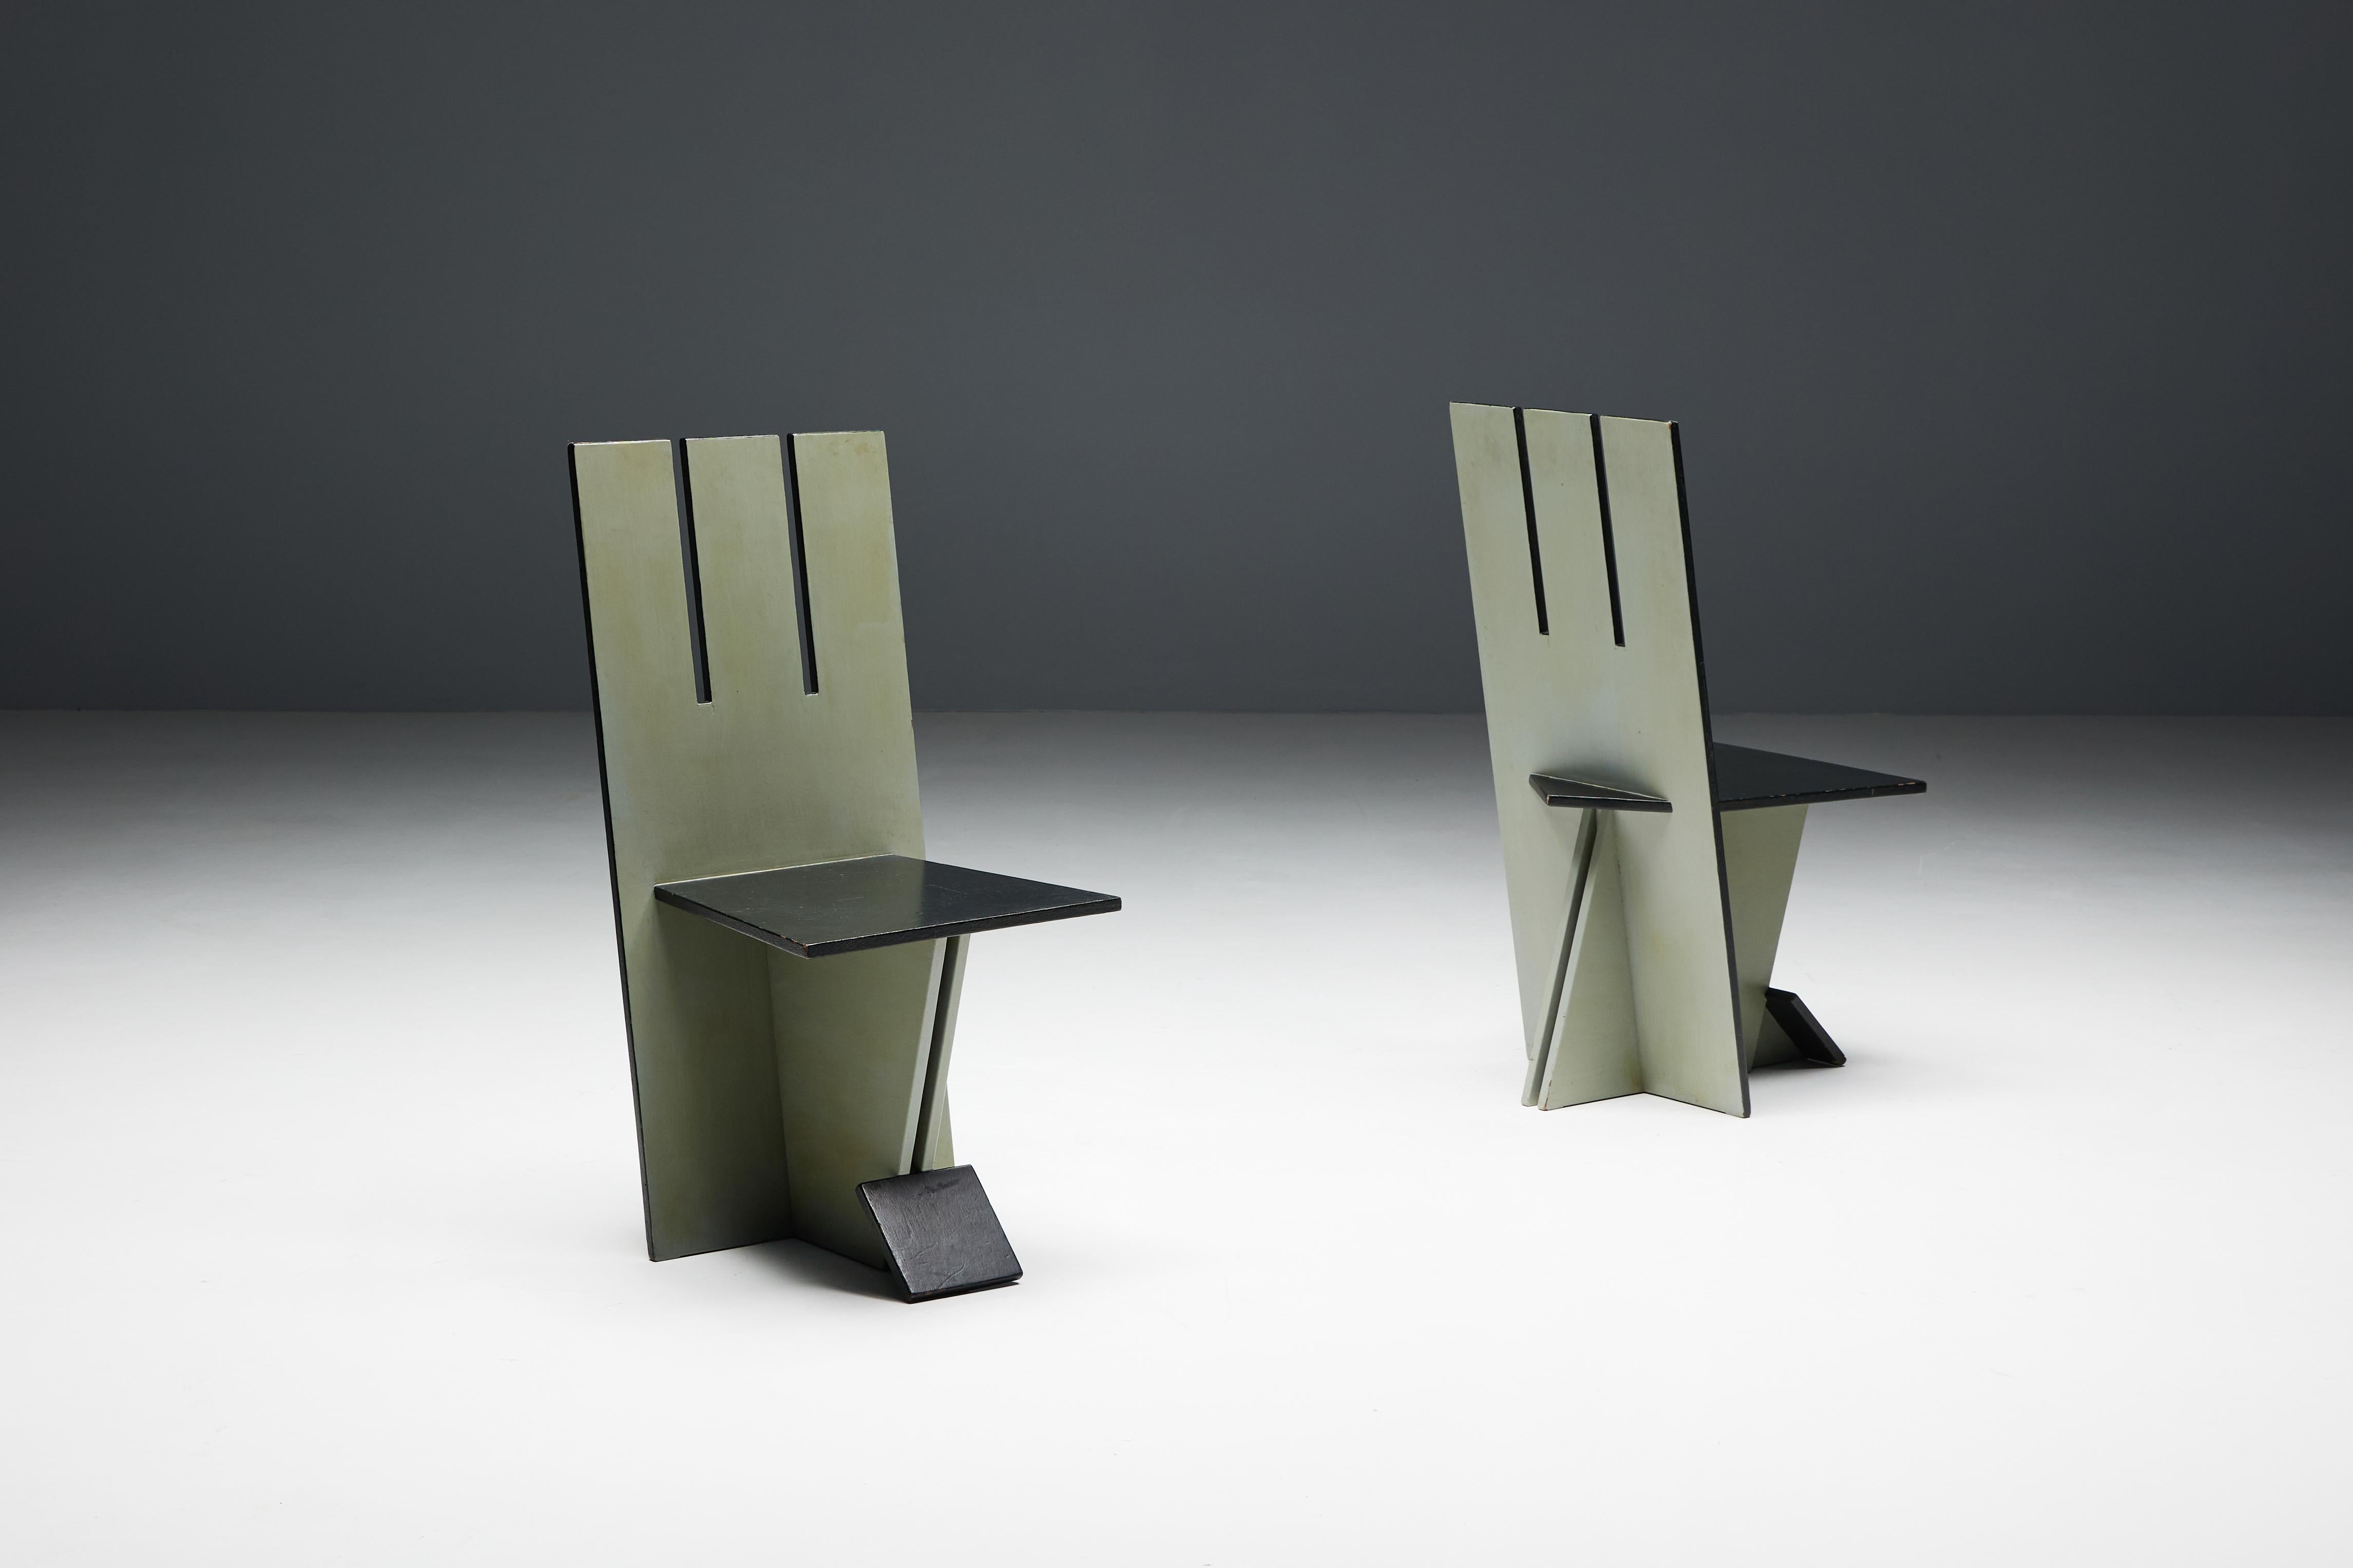 Dining Chairs in the style of De Stijl Movement, Netherlands, 1950s For Sale 1